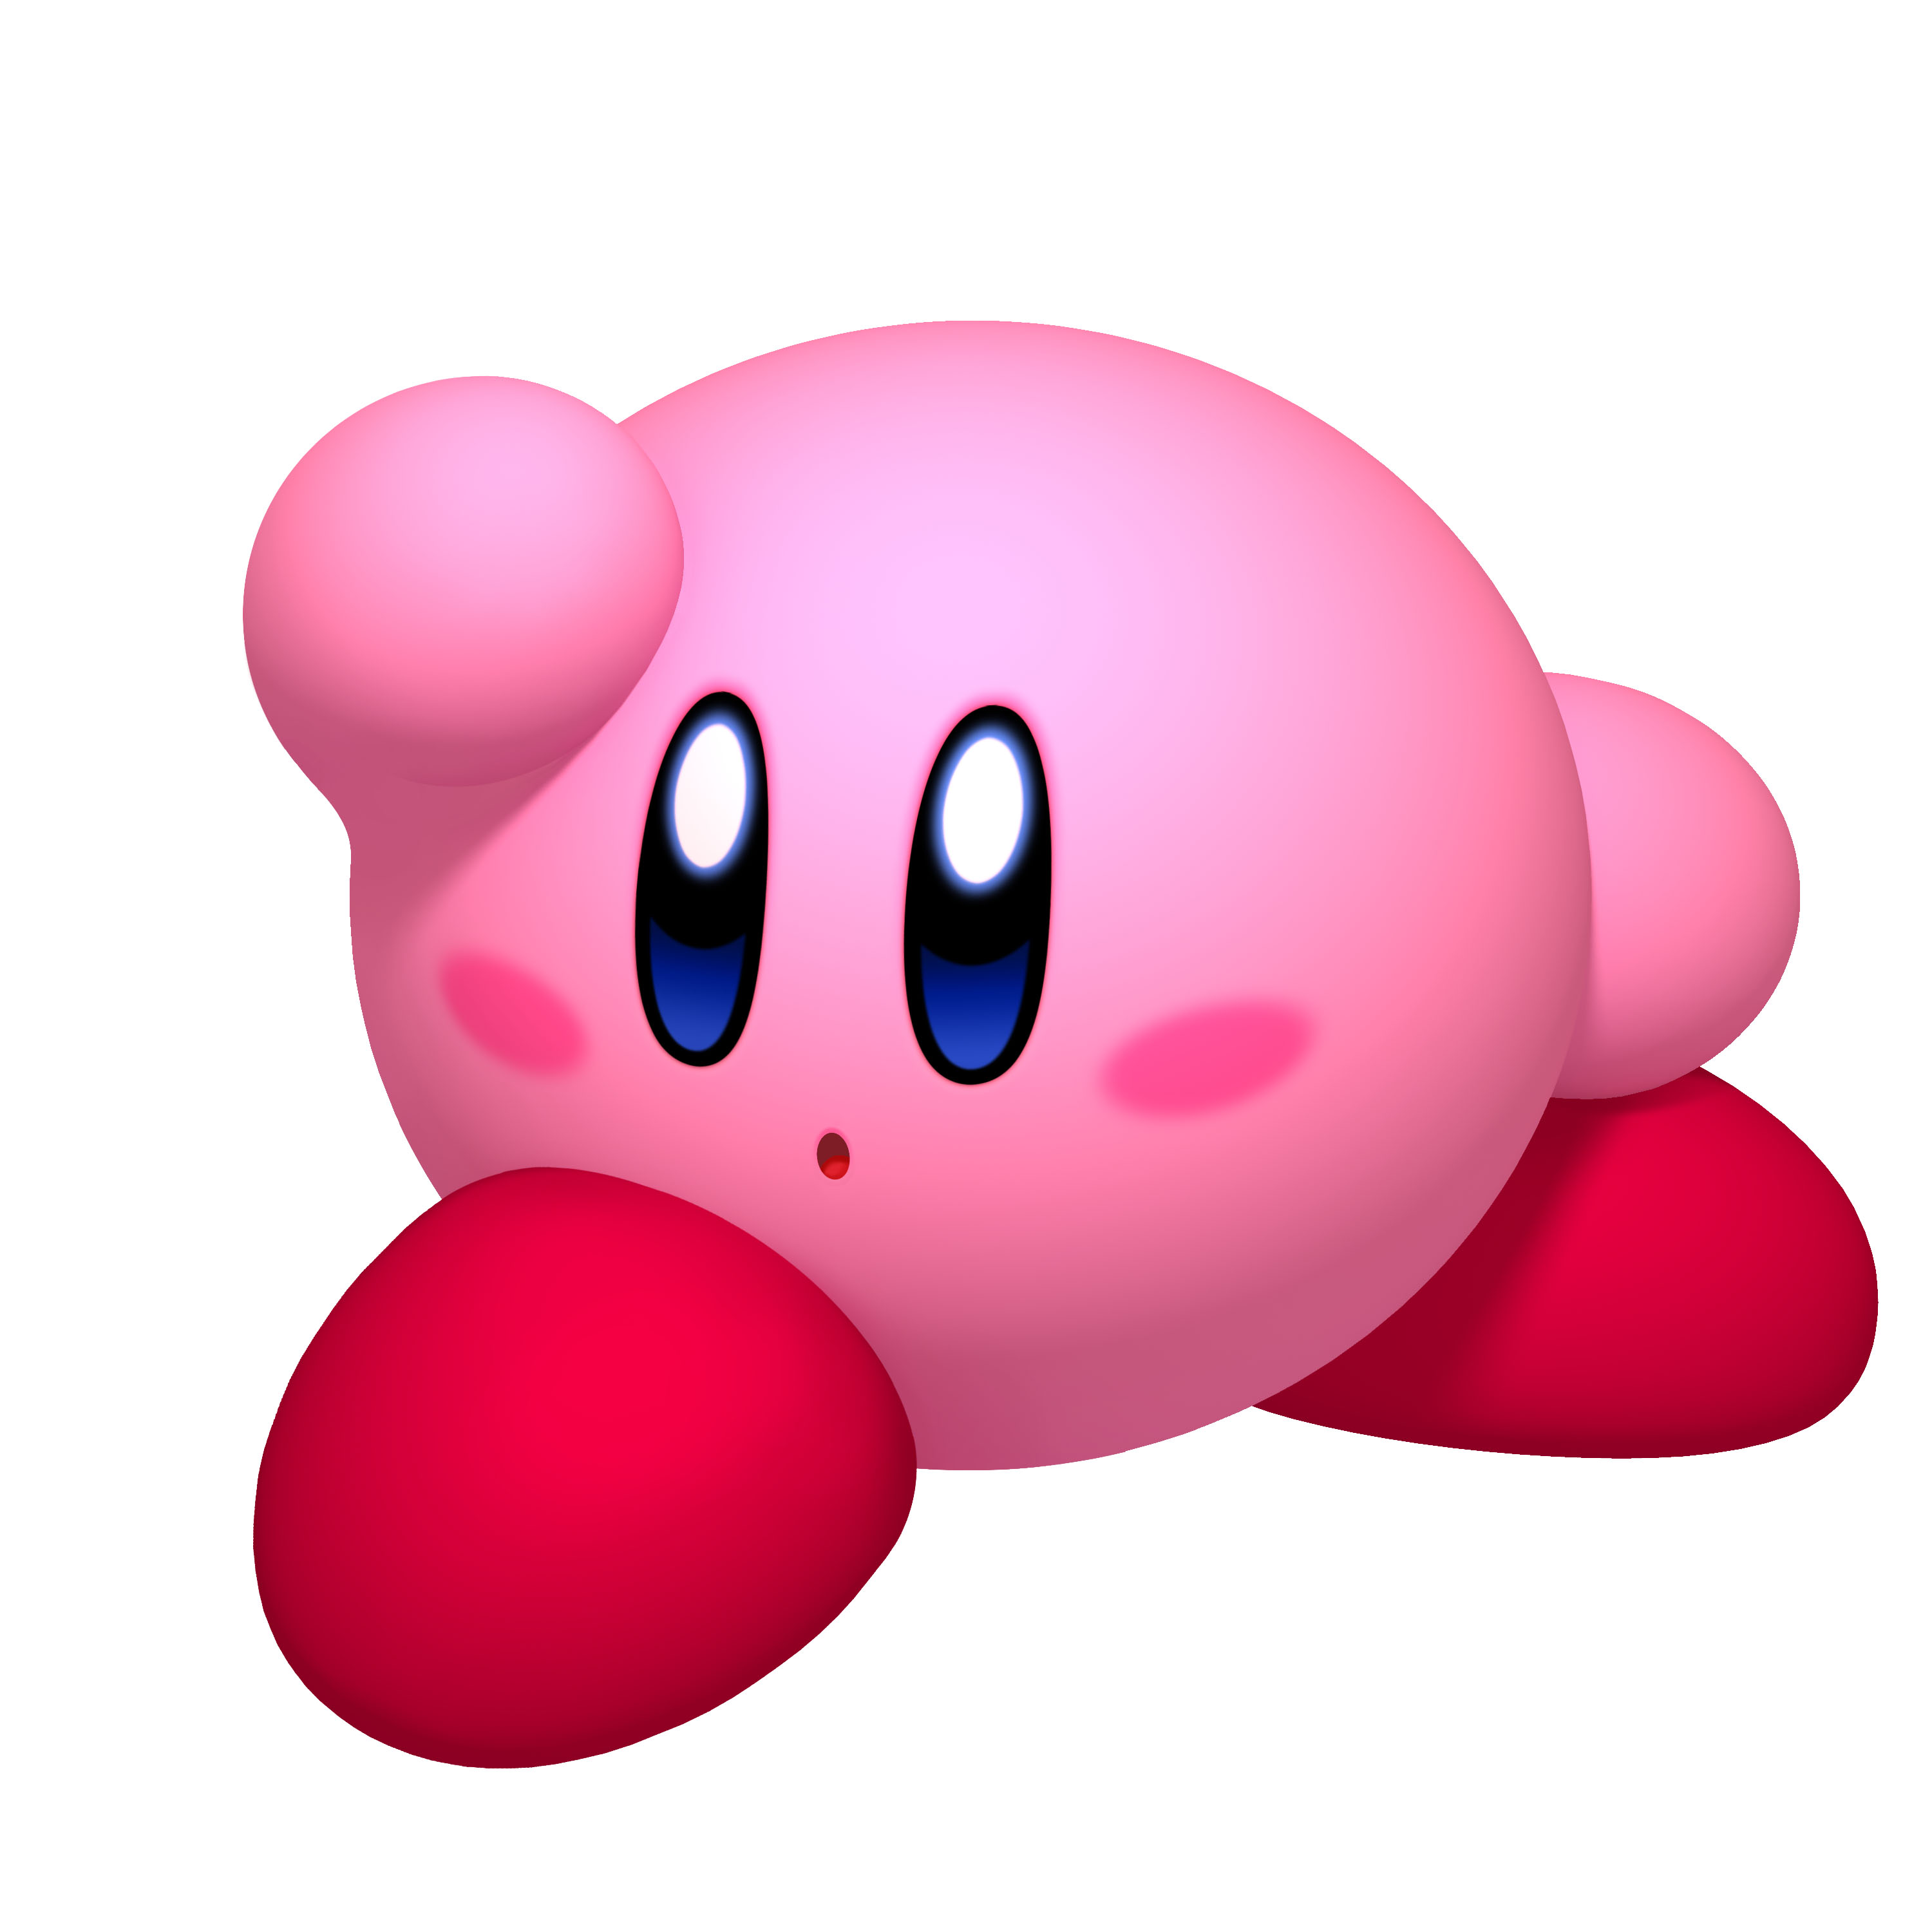 Kirby return to dreamland iso patch